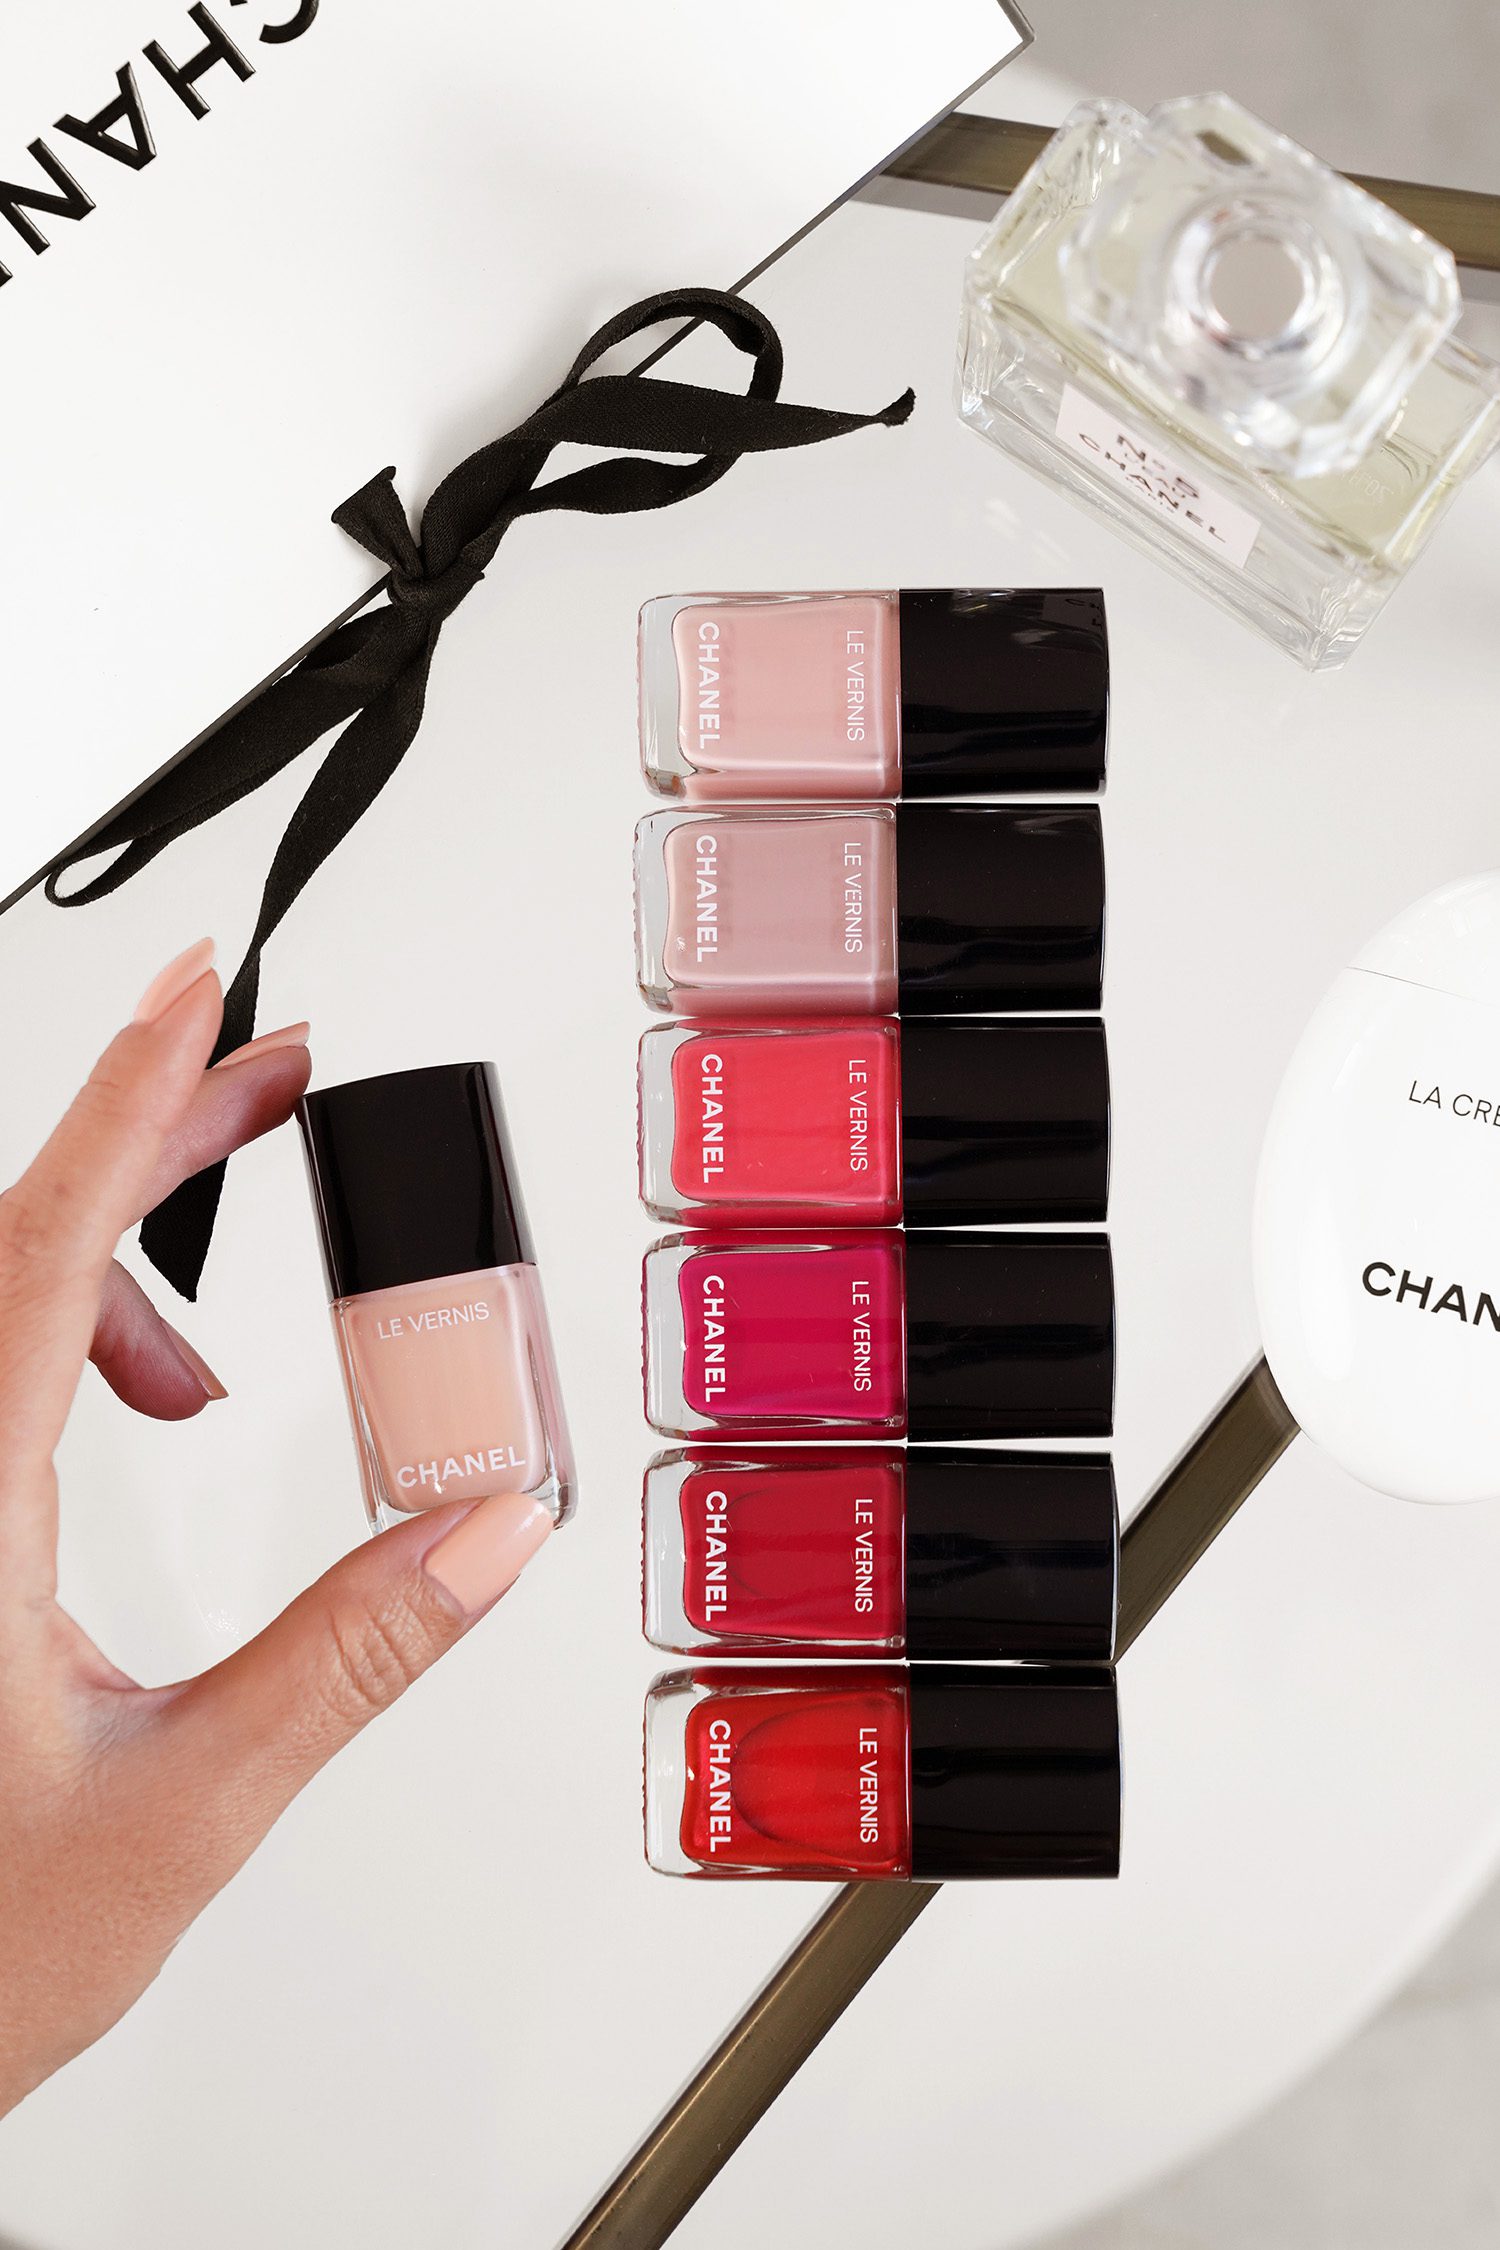 11 Beauty Gifts for Women Who Have Everything: Chanel, Lemaire, and More